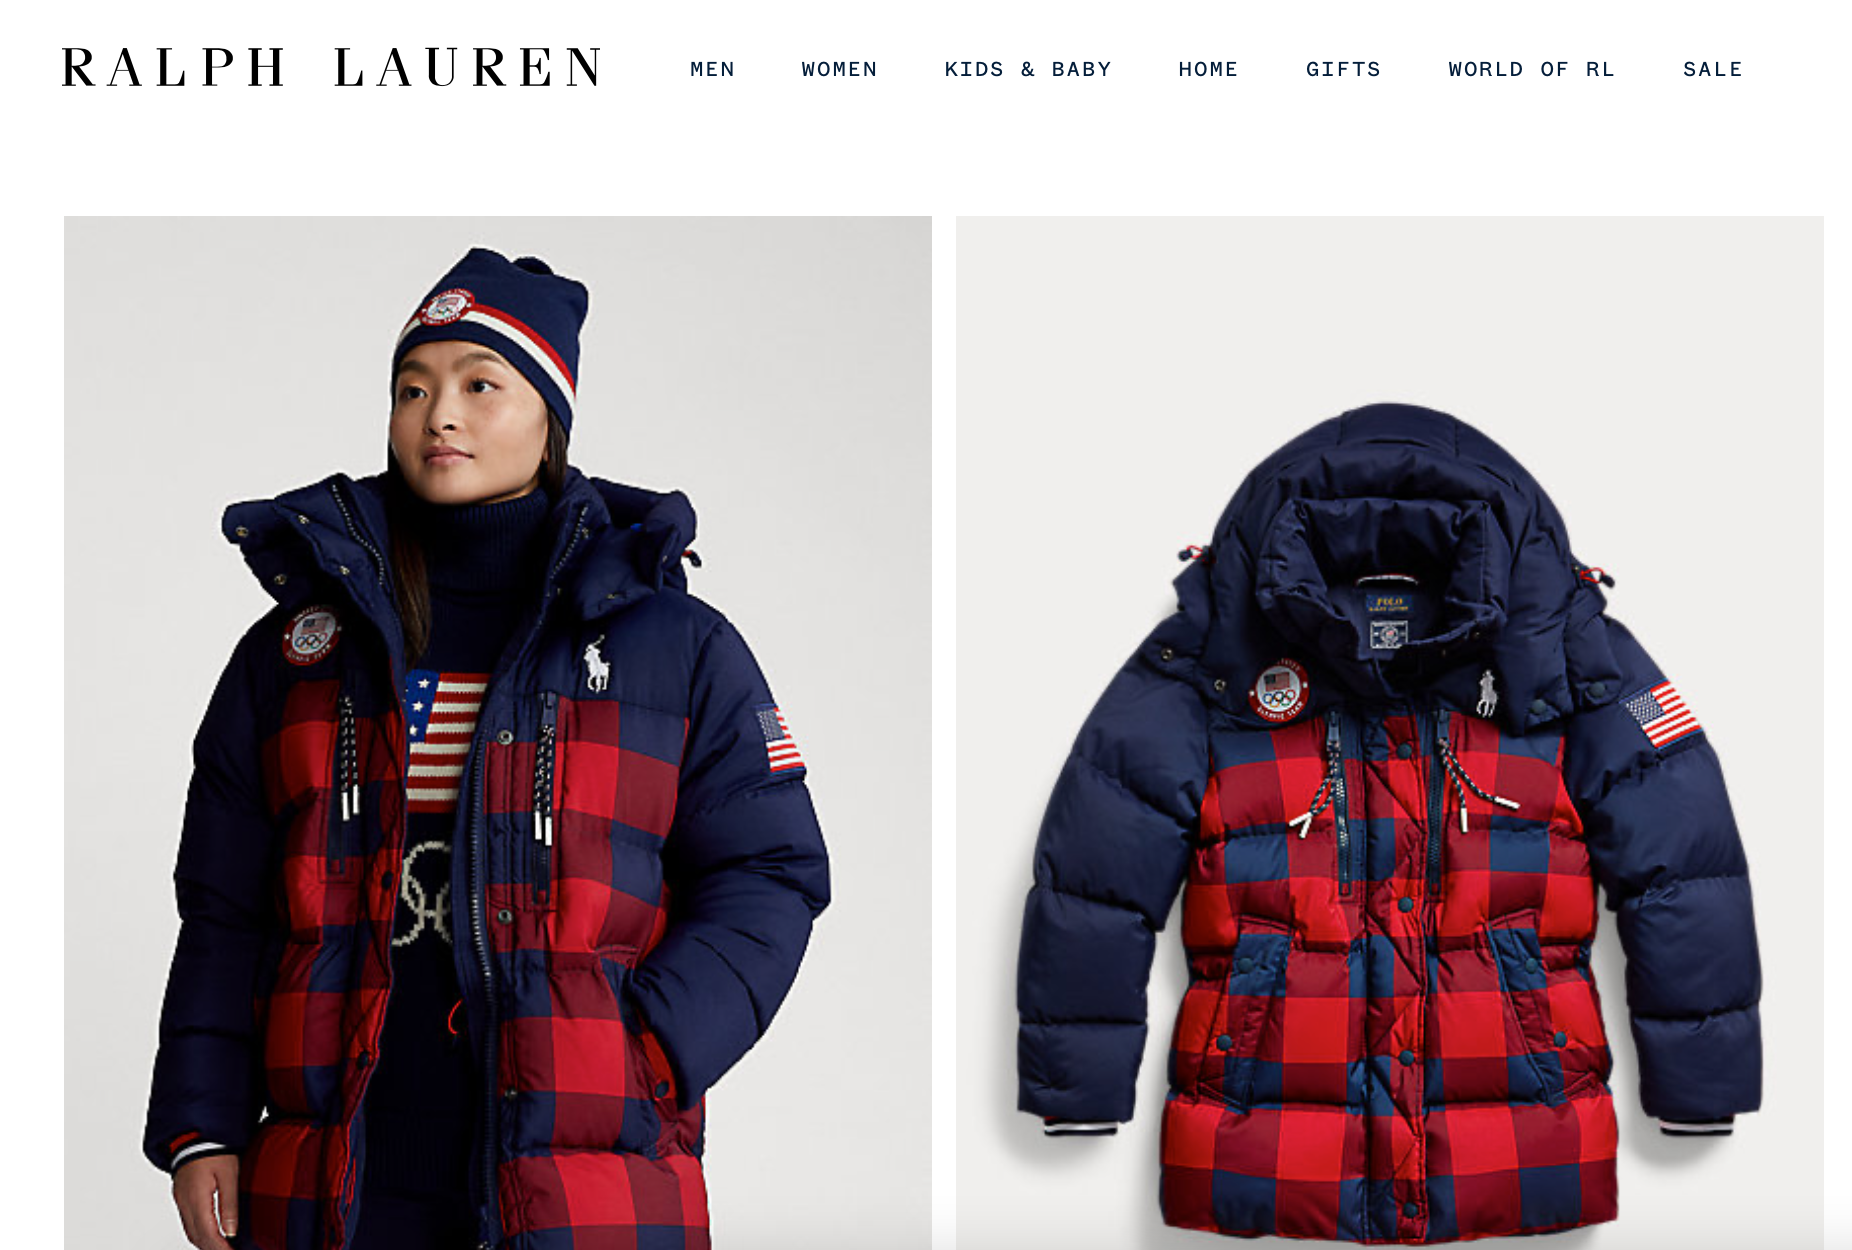 Ralph Lauren unveils Team USA’s closing ceremony outfits for Beijing Olympics